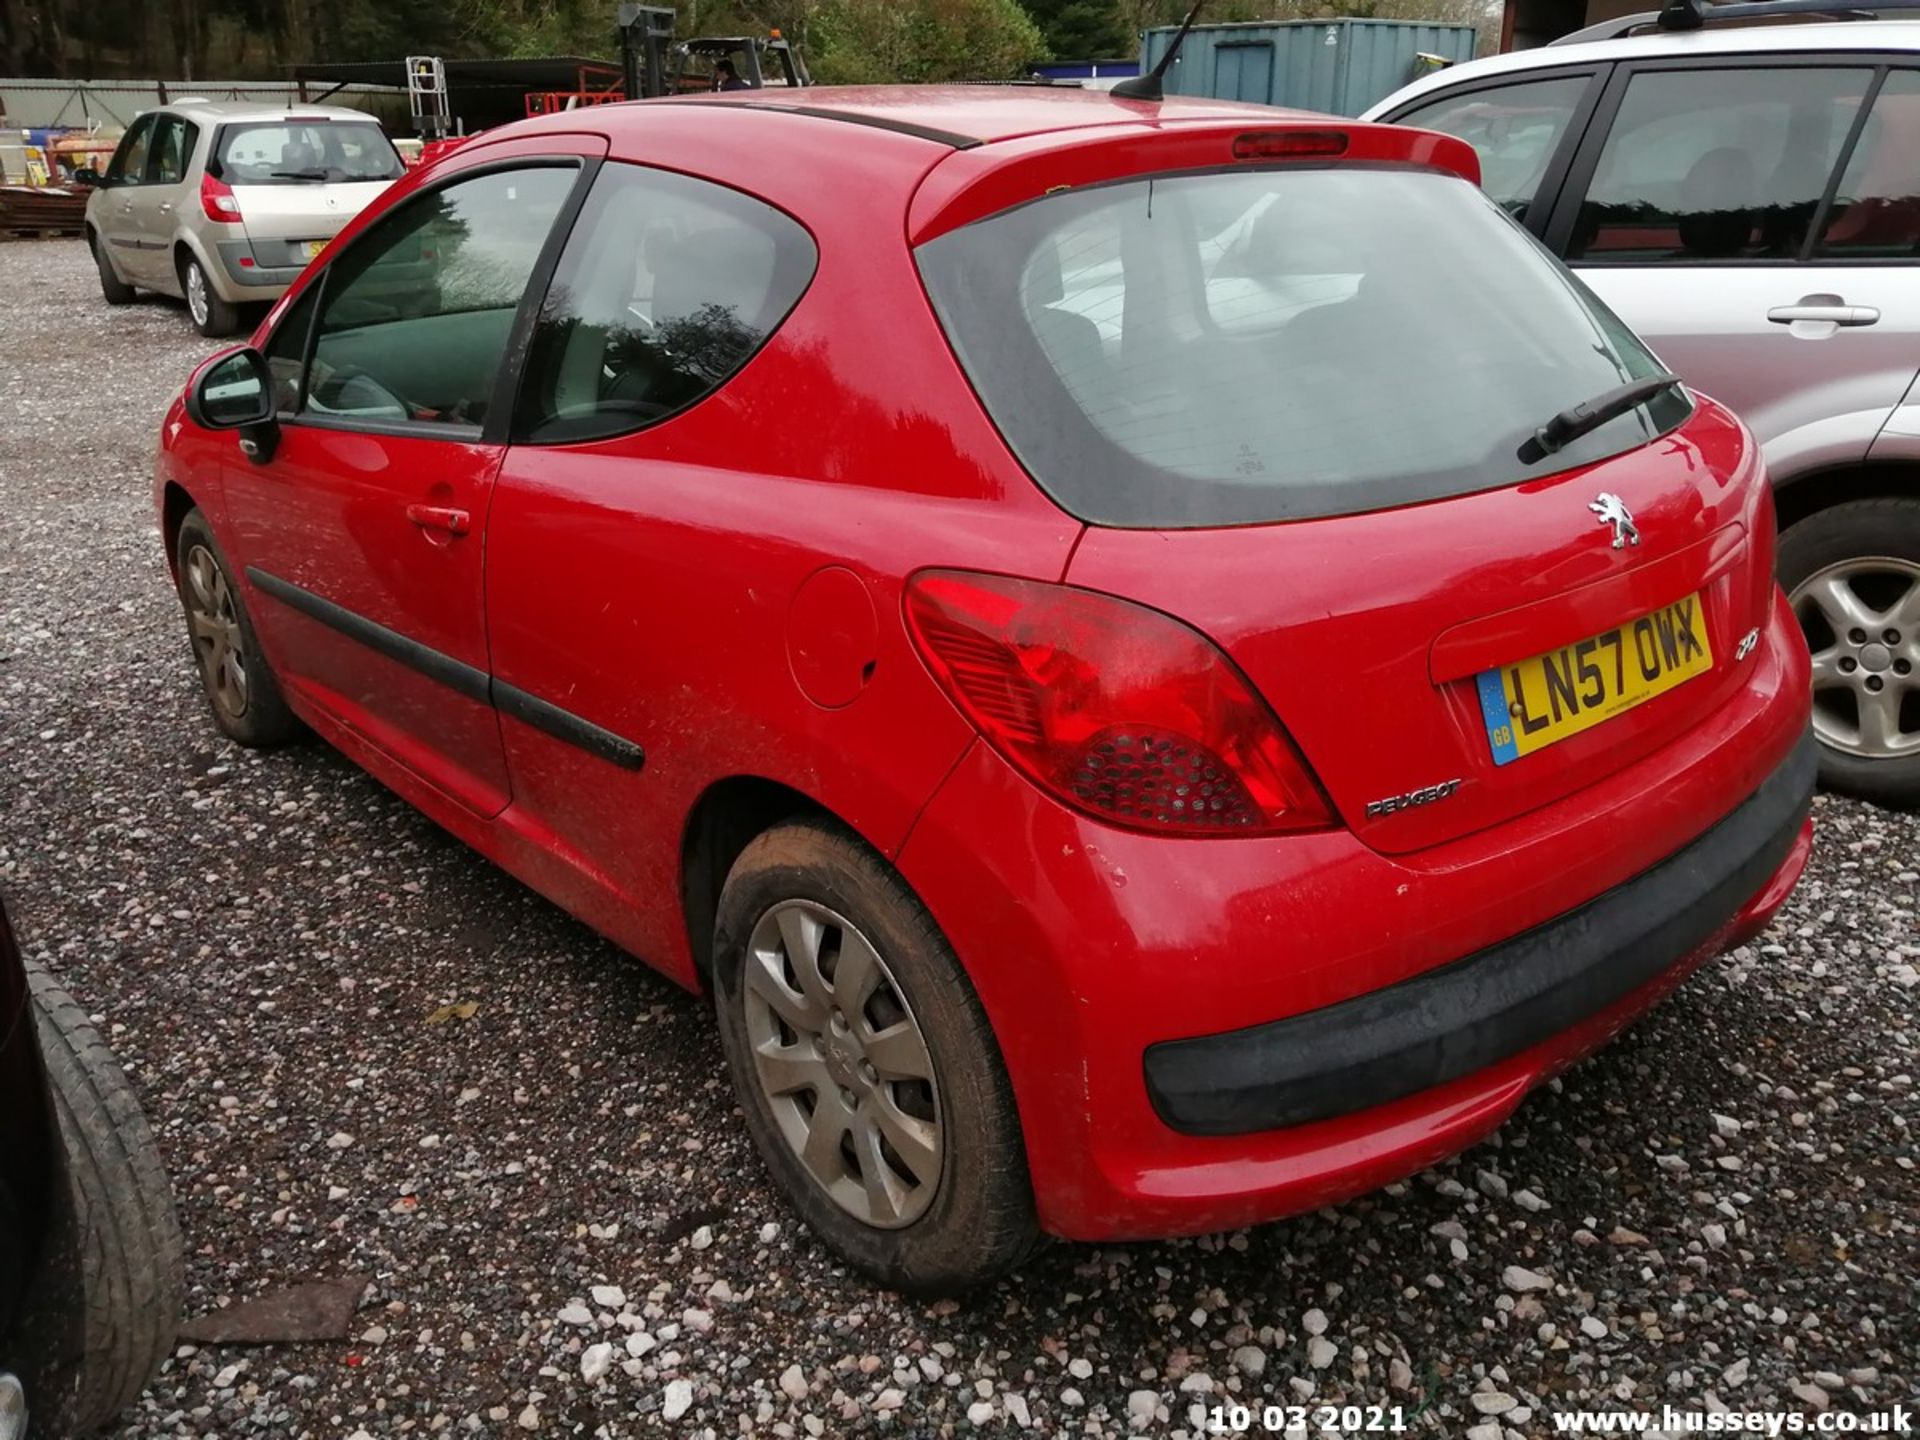 07/57 PEUGEOT 207 S HDI 67 - 1398cc 3dr Hatchback (Red) - Image 3 of 11